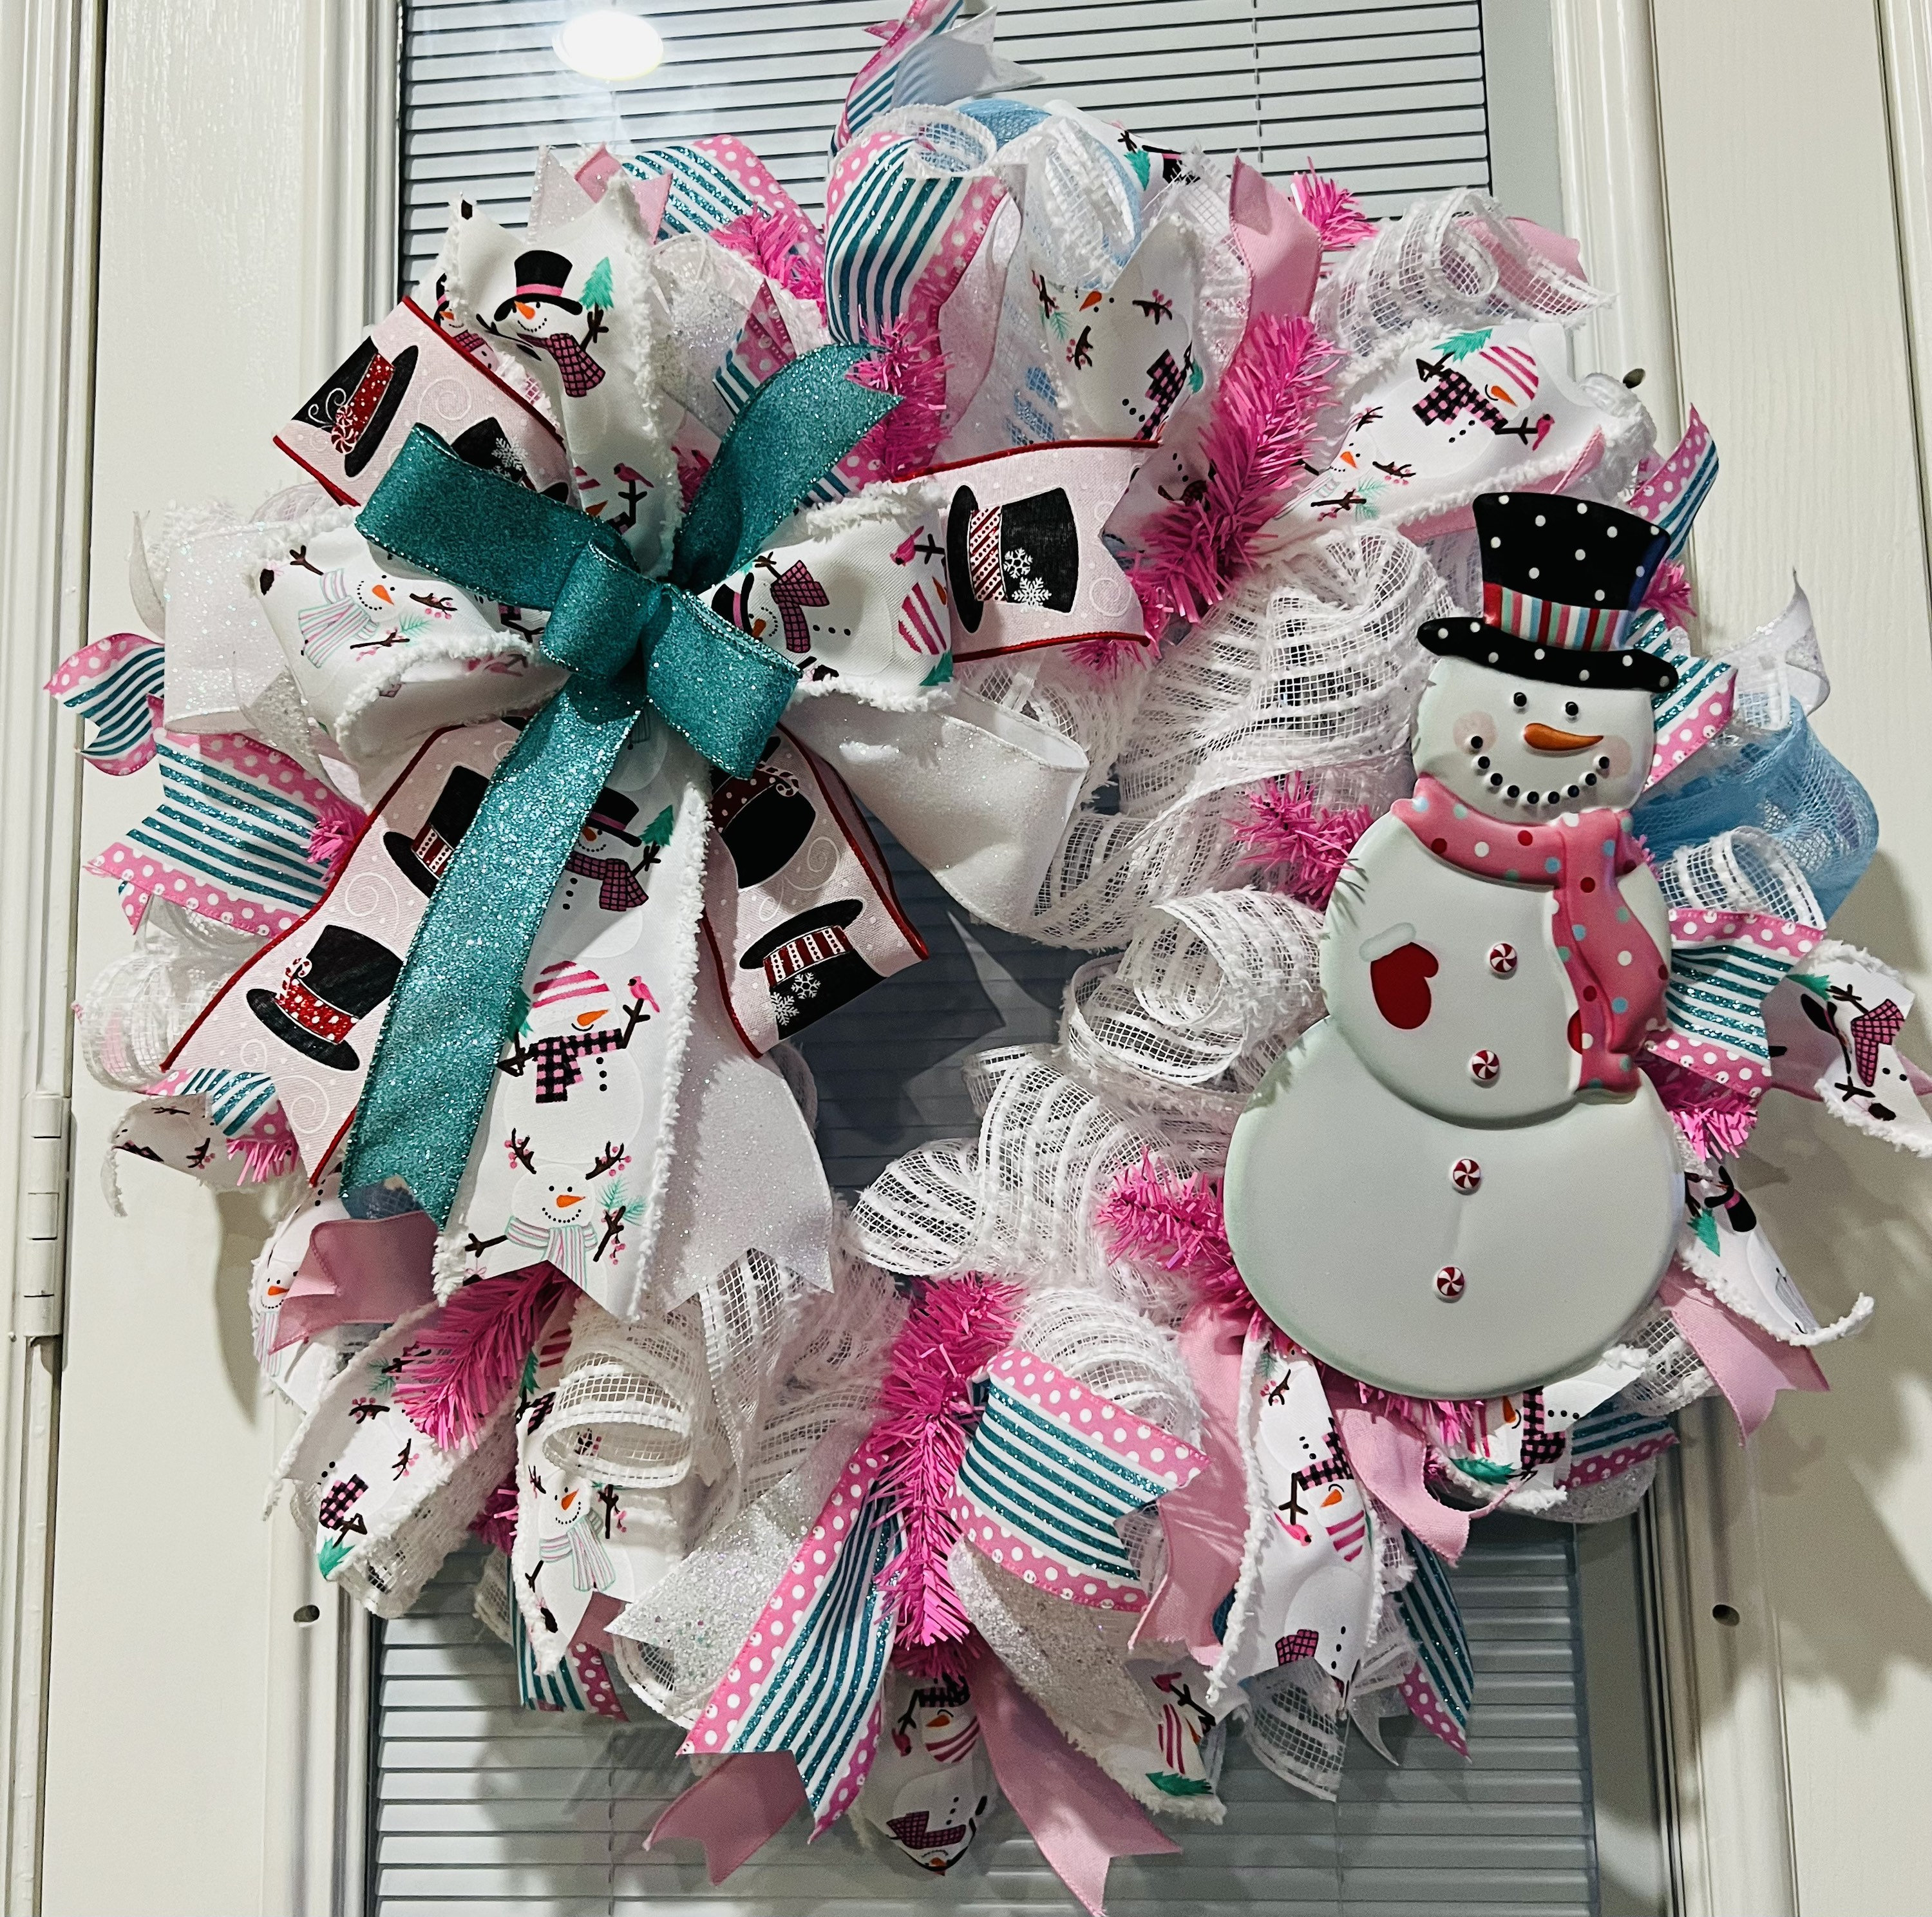 Winter Snowman Mesh Wreath for Front Door, Christmas Wreath, Front Porch  Decor, Gift, Whimsical Snowman, Snowflake Ribbon, Large Mesh Wreath 